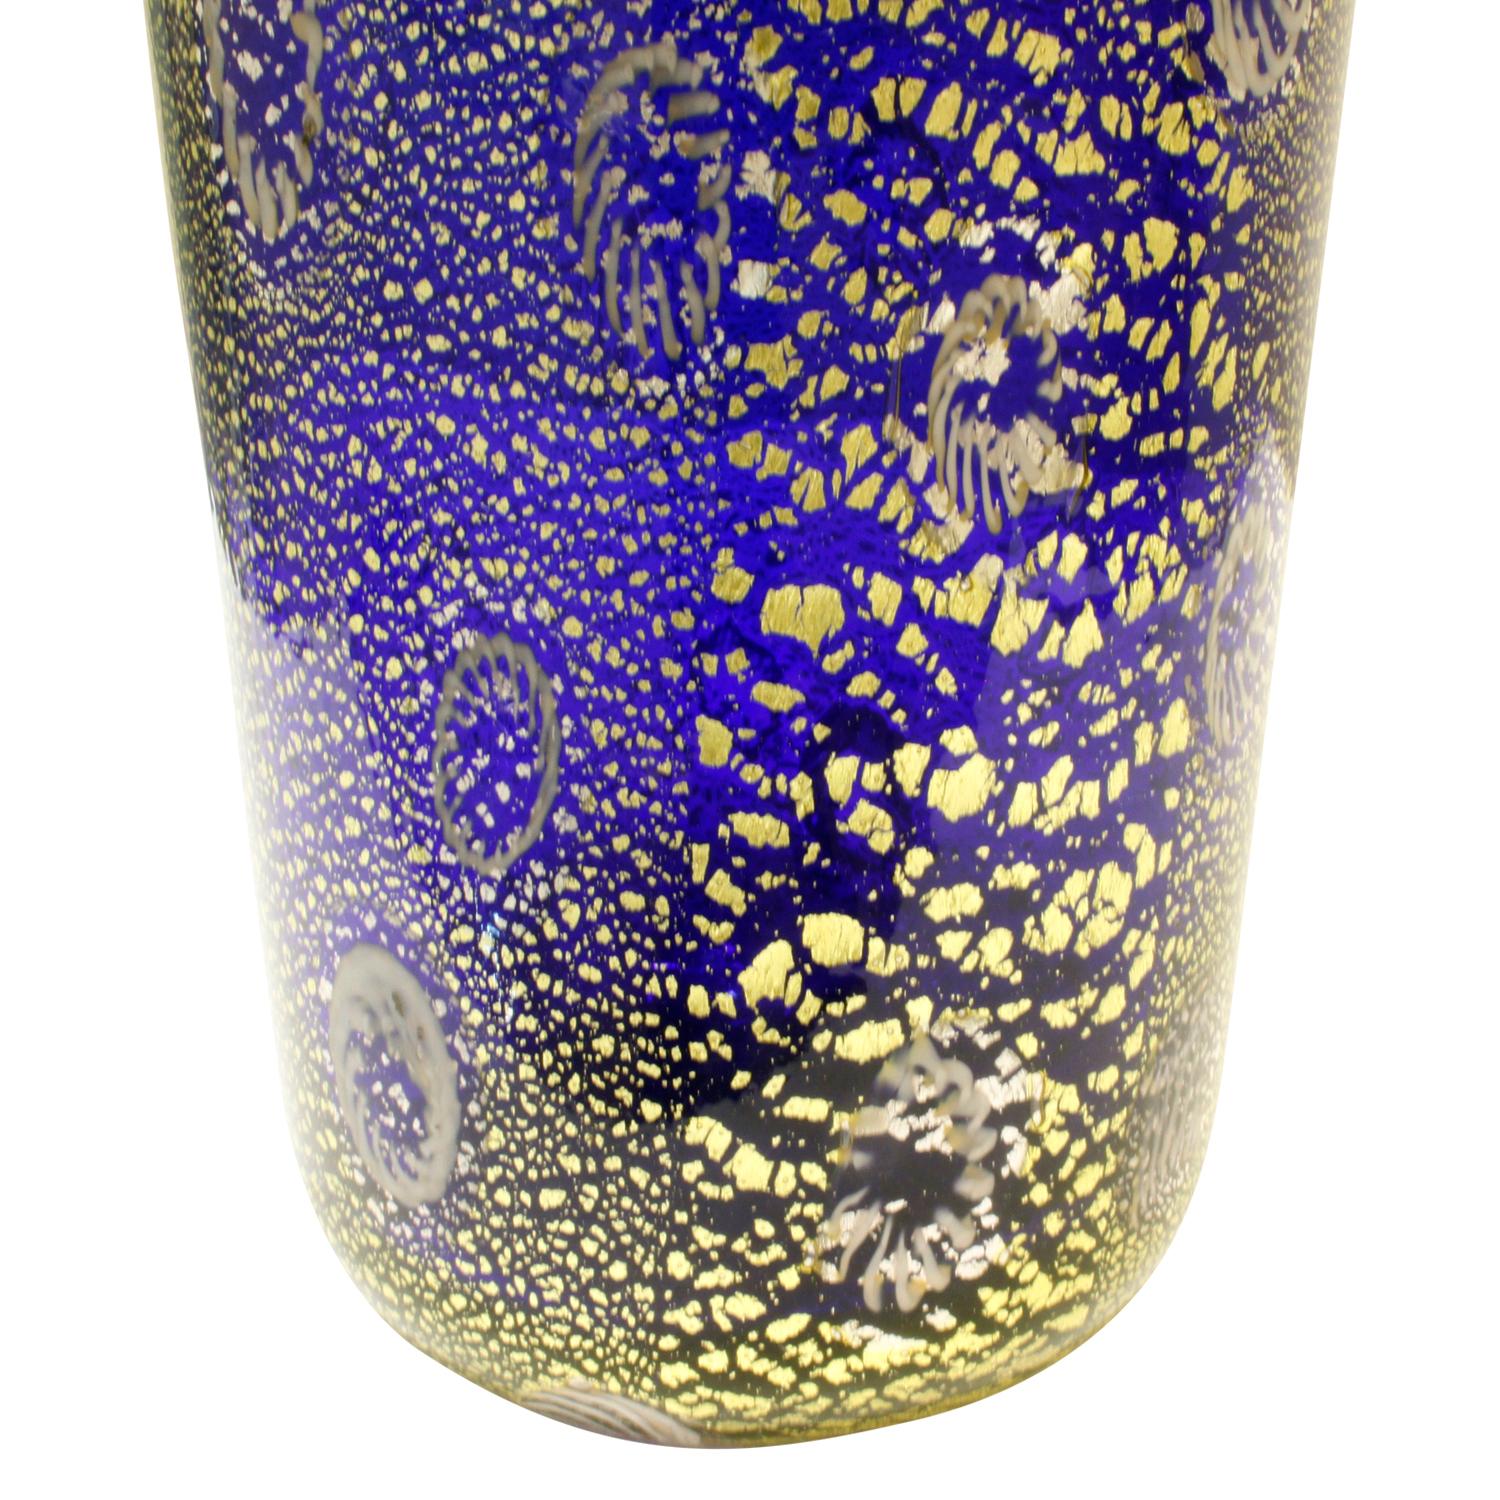 Mid-Century Modern Giulio Radi Hand Blown Glass Vase with Murrhines and Gold Foil, circa 1950 For Sale